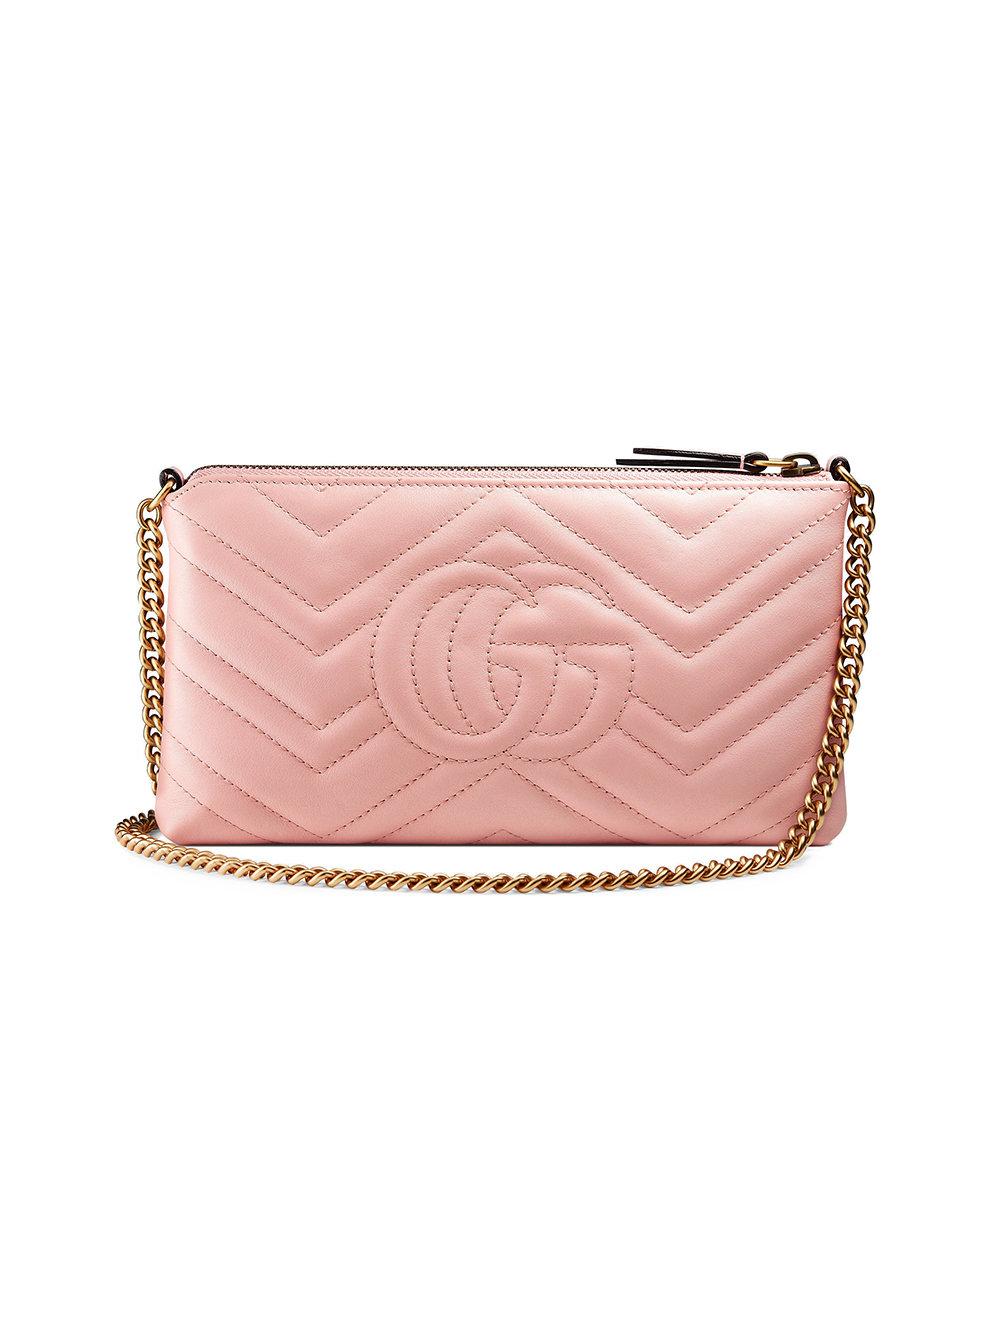 Gucci Gg Marmont Mini Chain Bag in Pink | Lyst